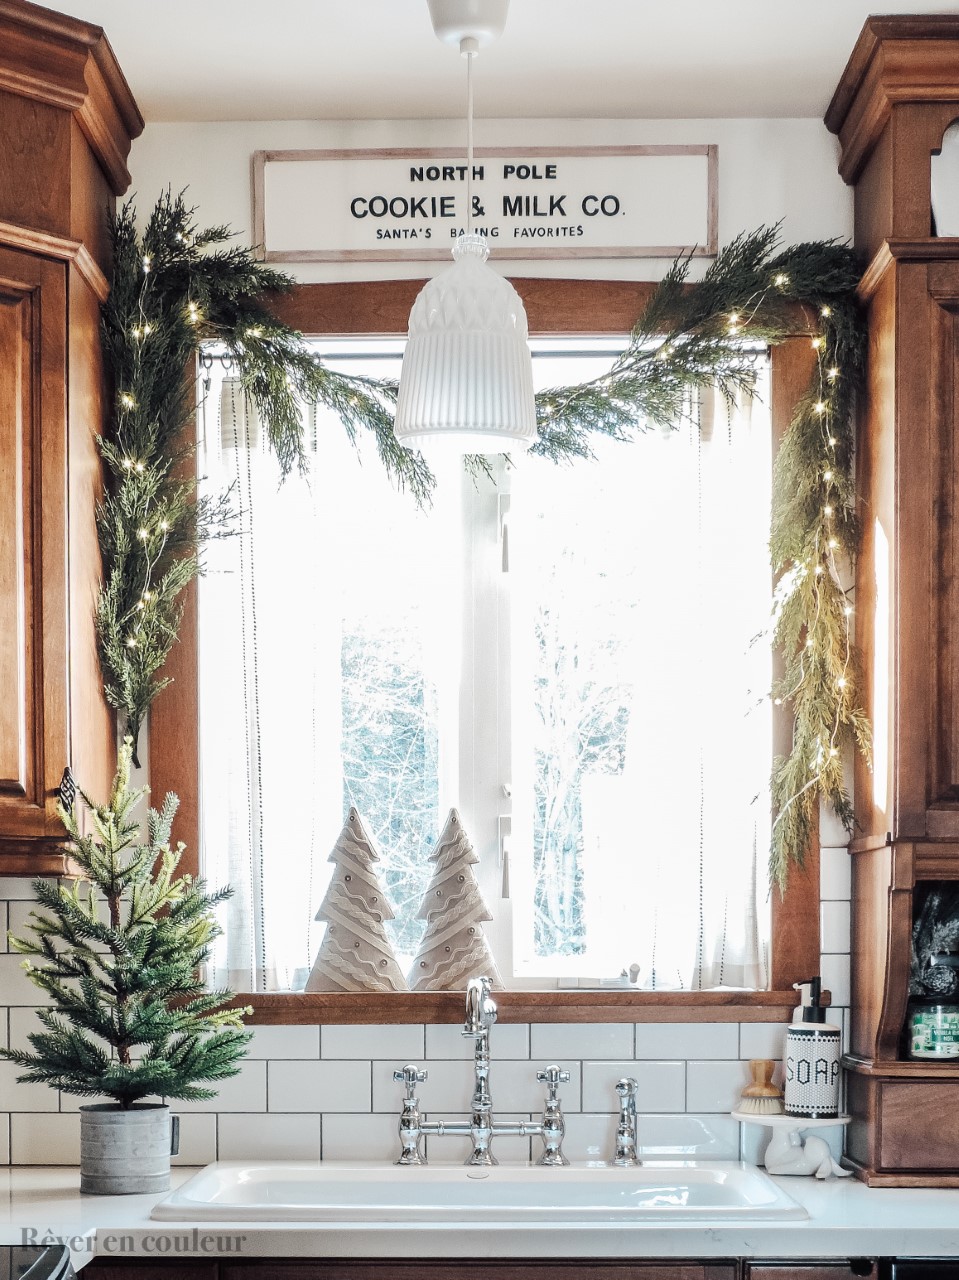 Christmas in the kitchen